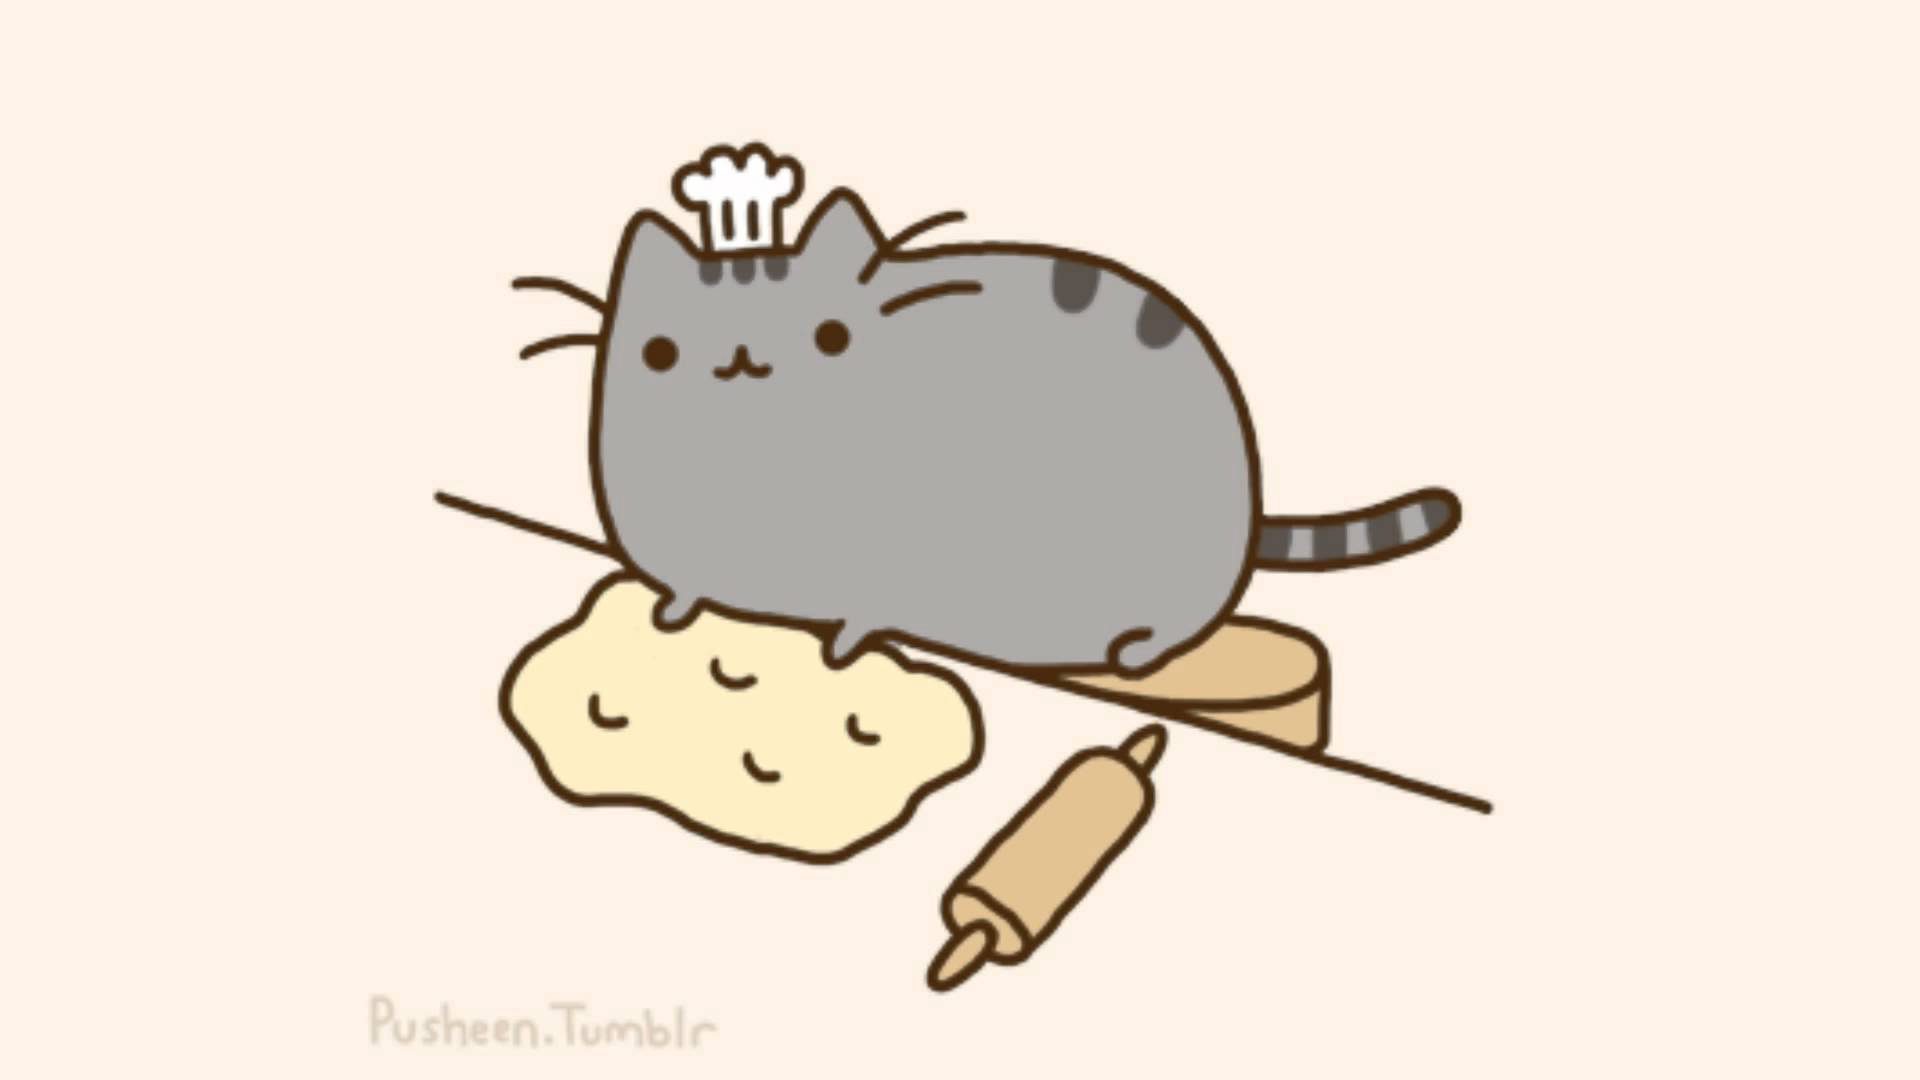 IT'S CATURDAY! Time For A Pusheen Pick Me Up Million Dogs